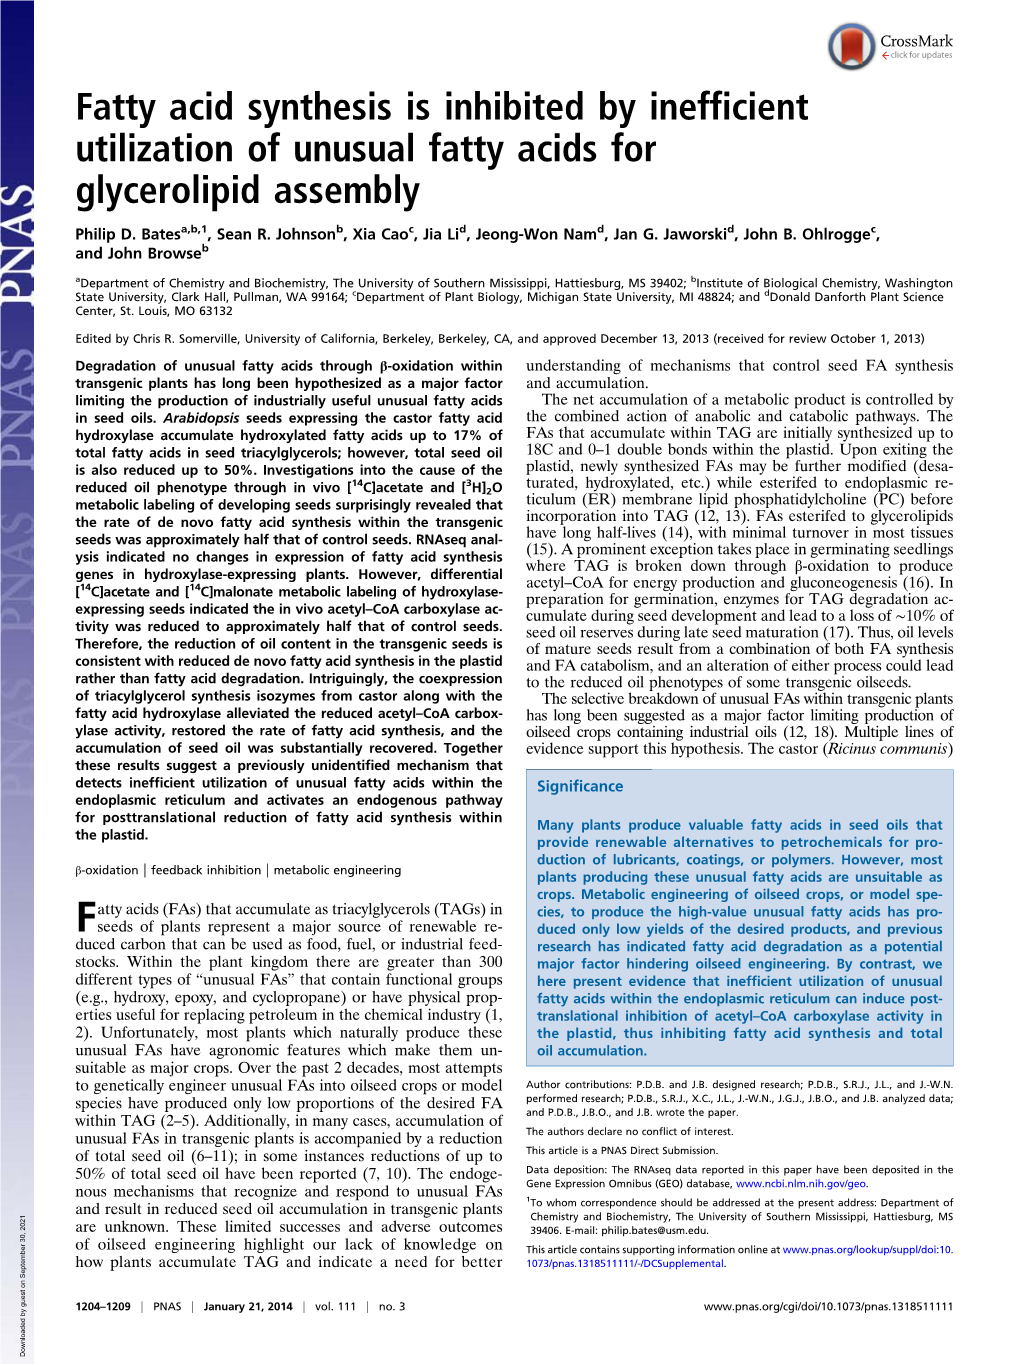 Fatty Acid Synthesis Is Inhibited by Inefficient Utilization of Unusual Fatty Acids for Glycerolipid Assembly